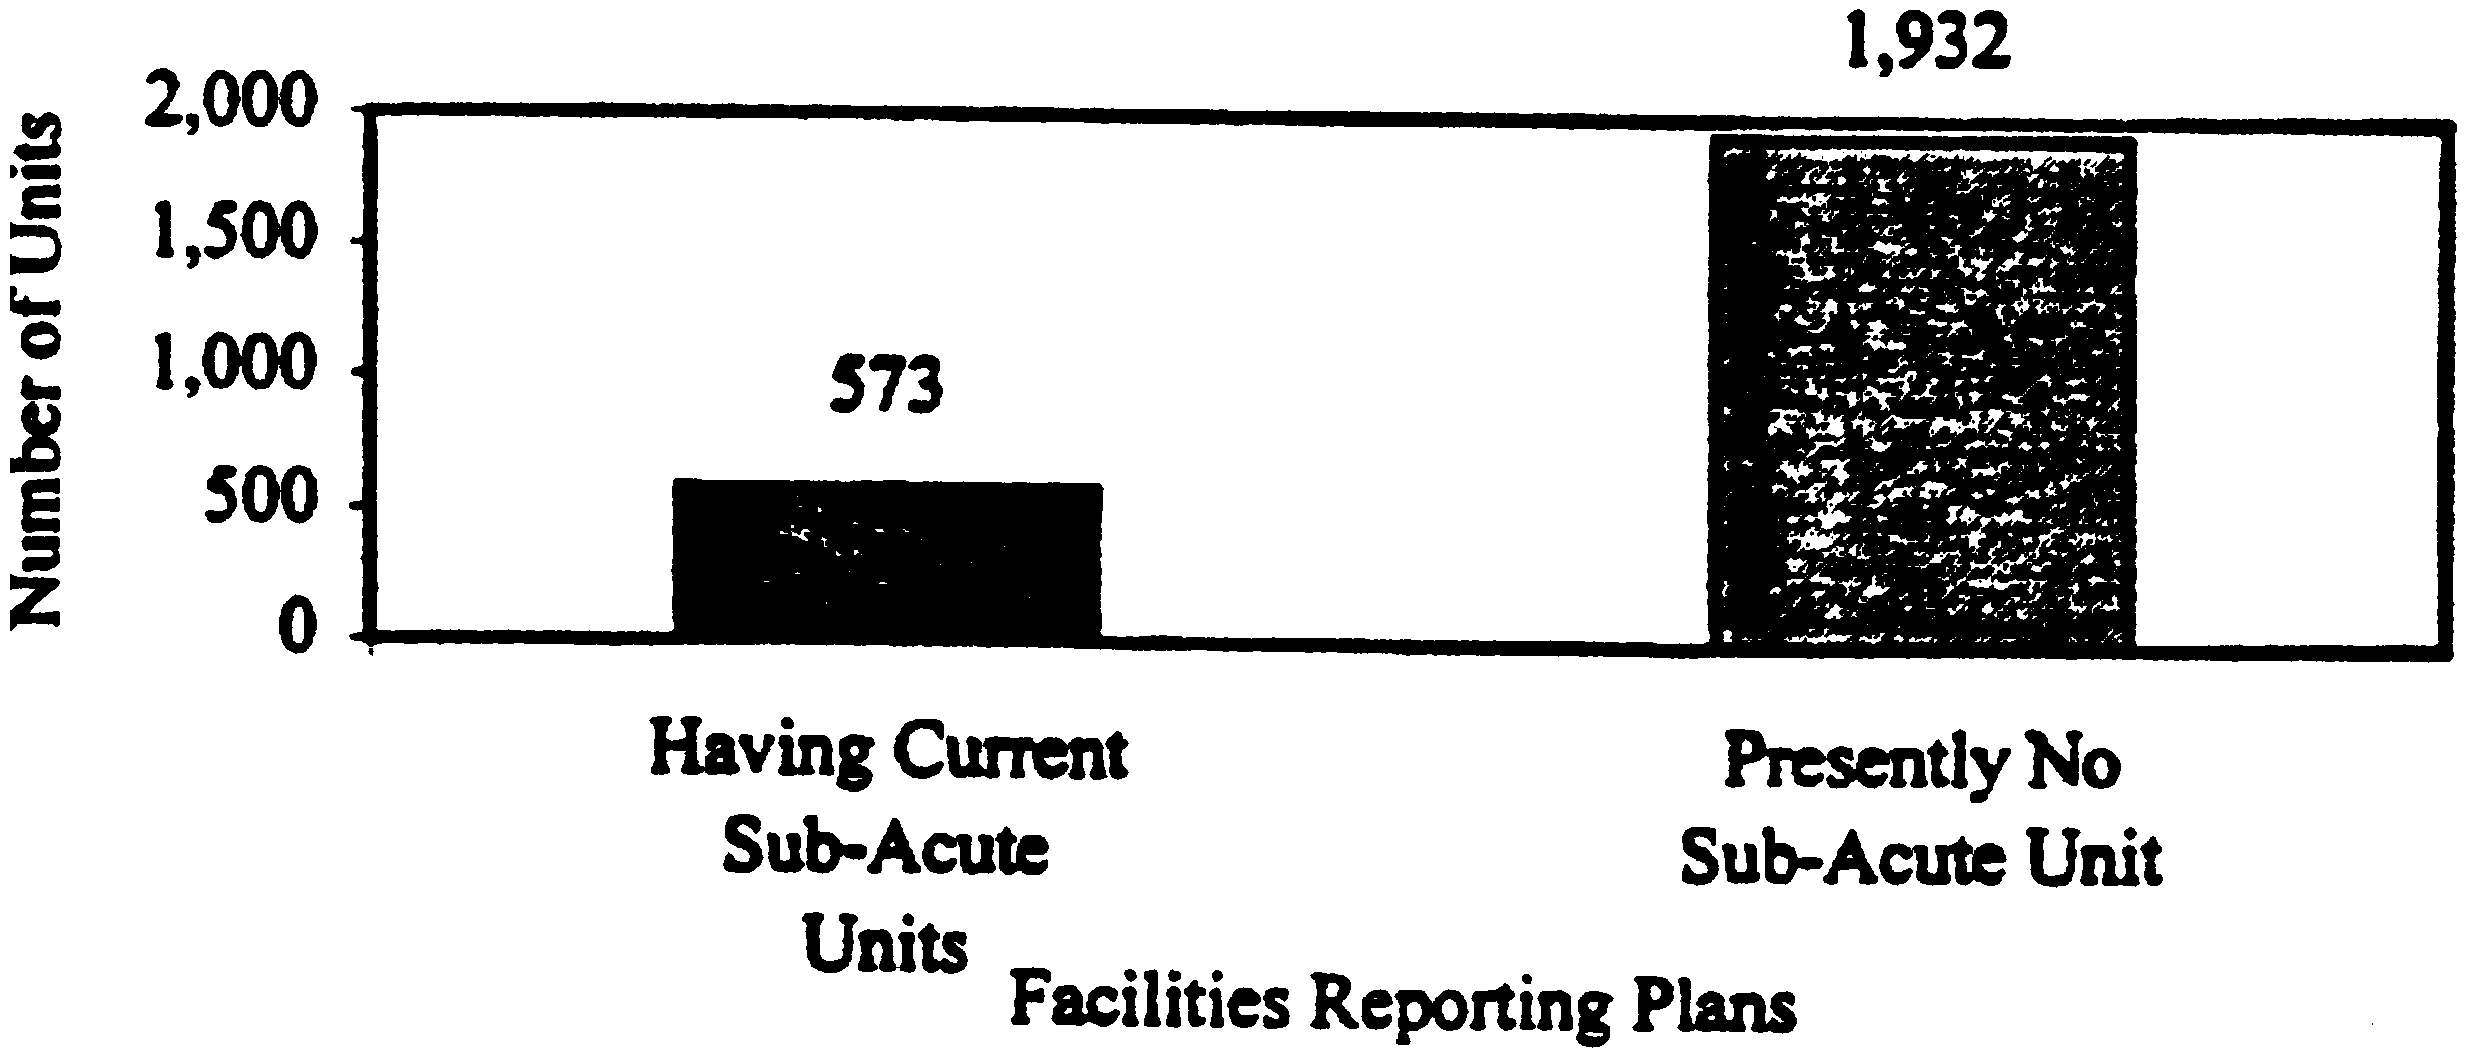 Bar Chart: Facilities with Plans to Expand Current or Develop New Sub-Acute Units